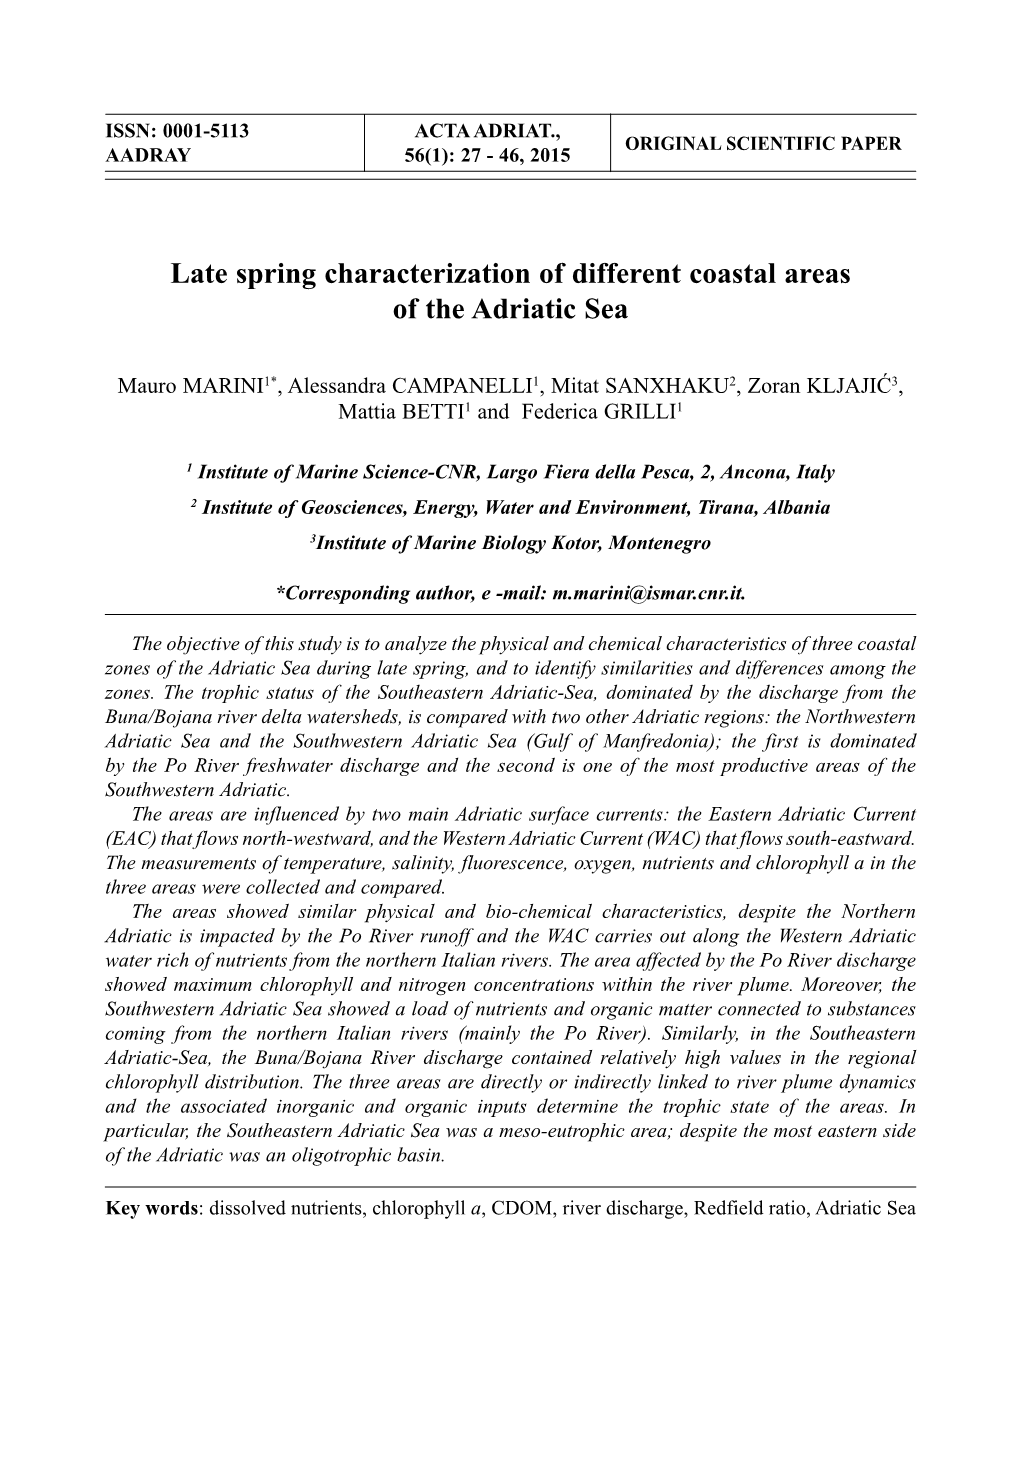 Late Spring Characterization of Different Coastal Areas of the Adriatic Sea